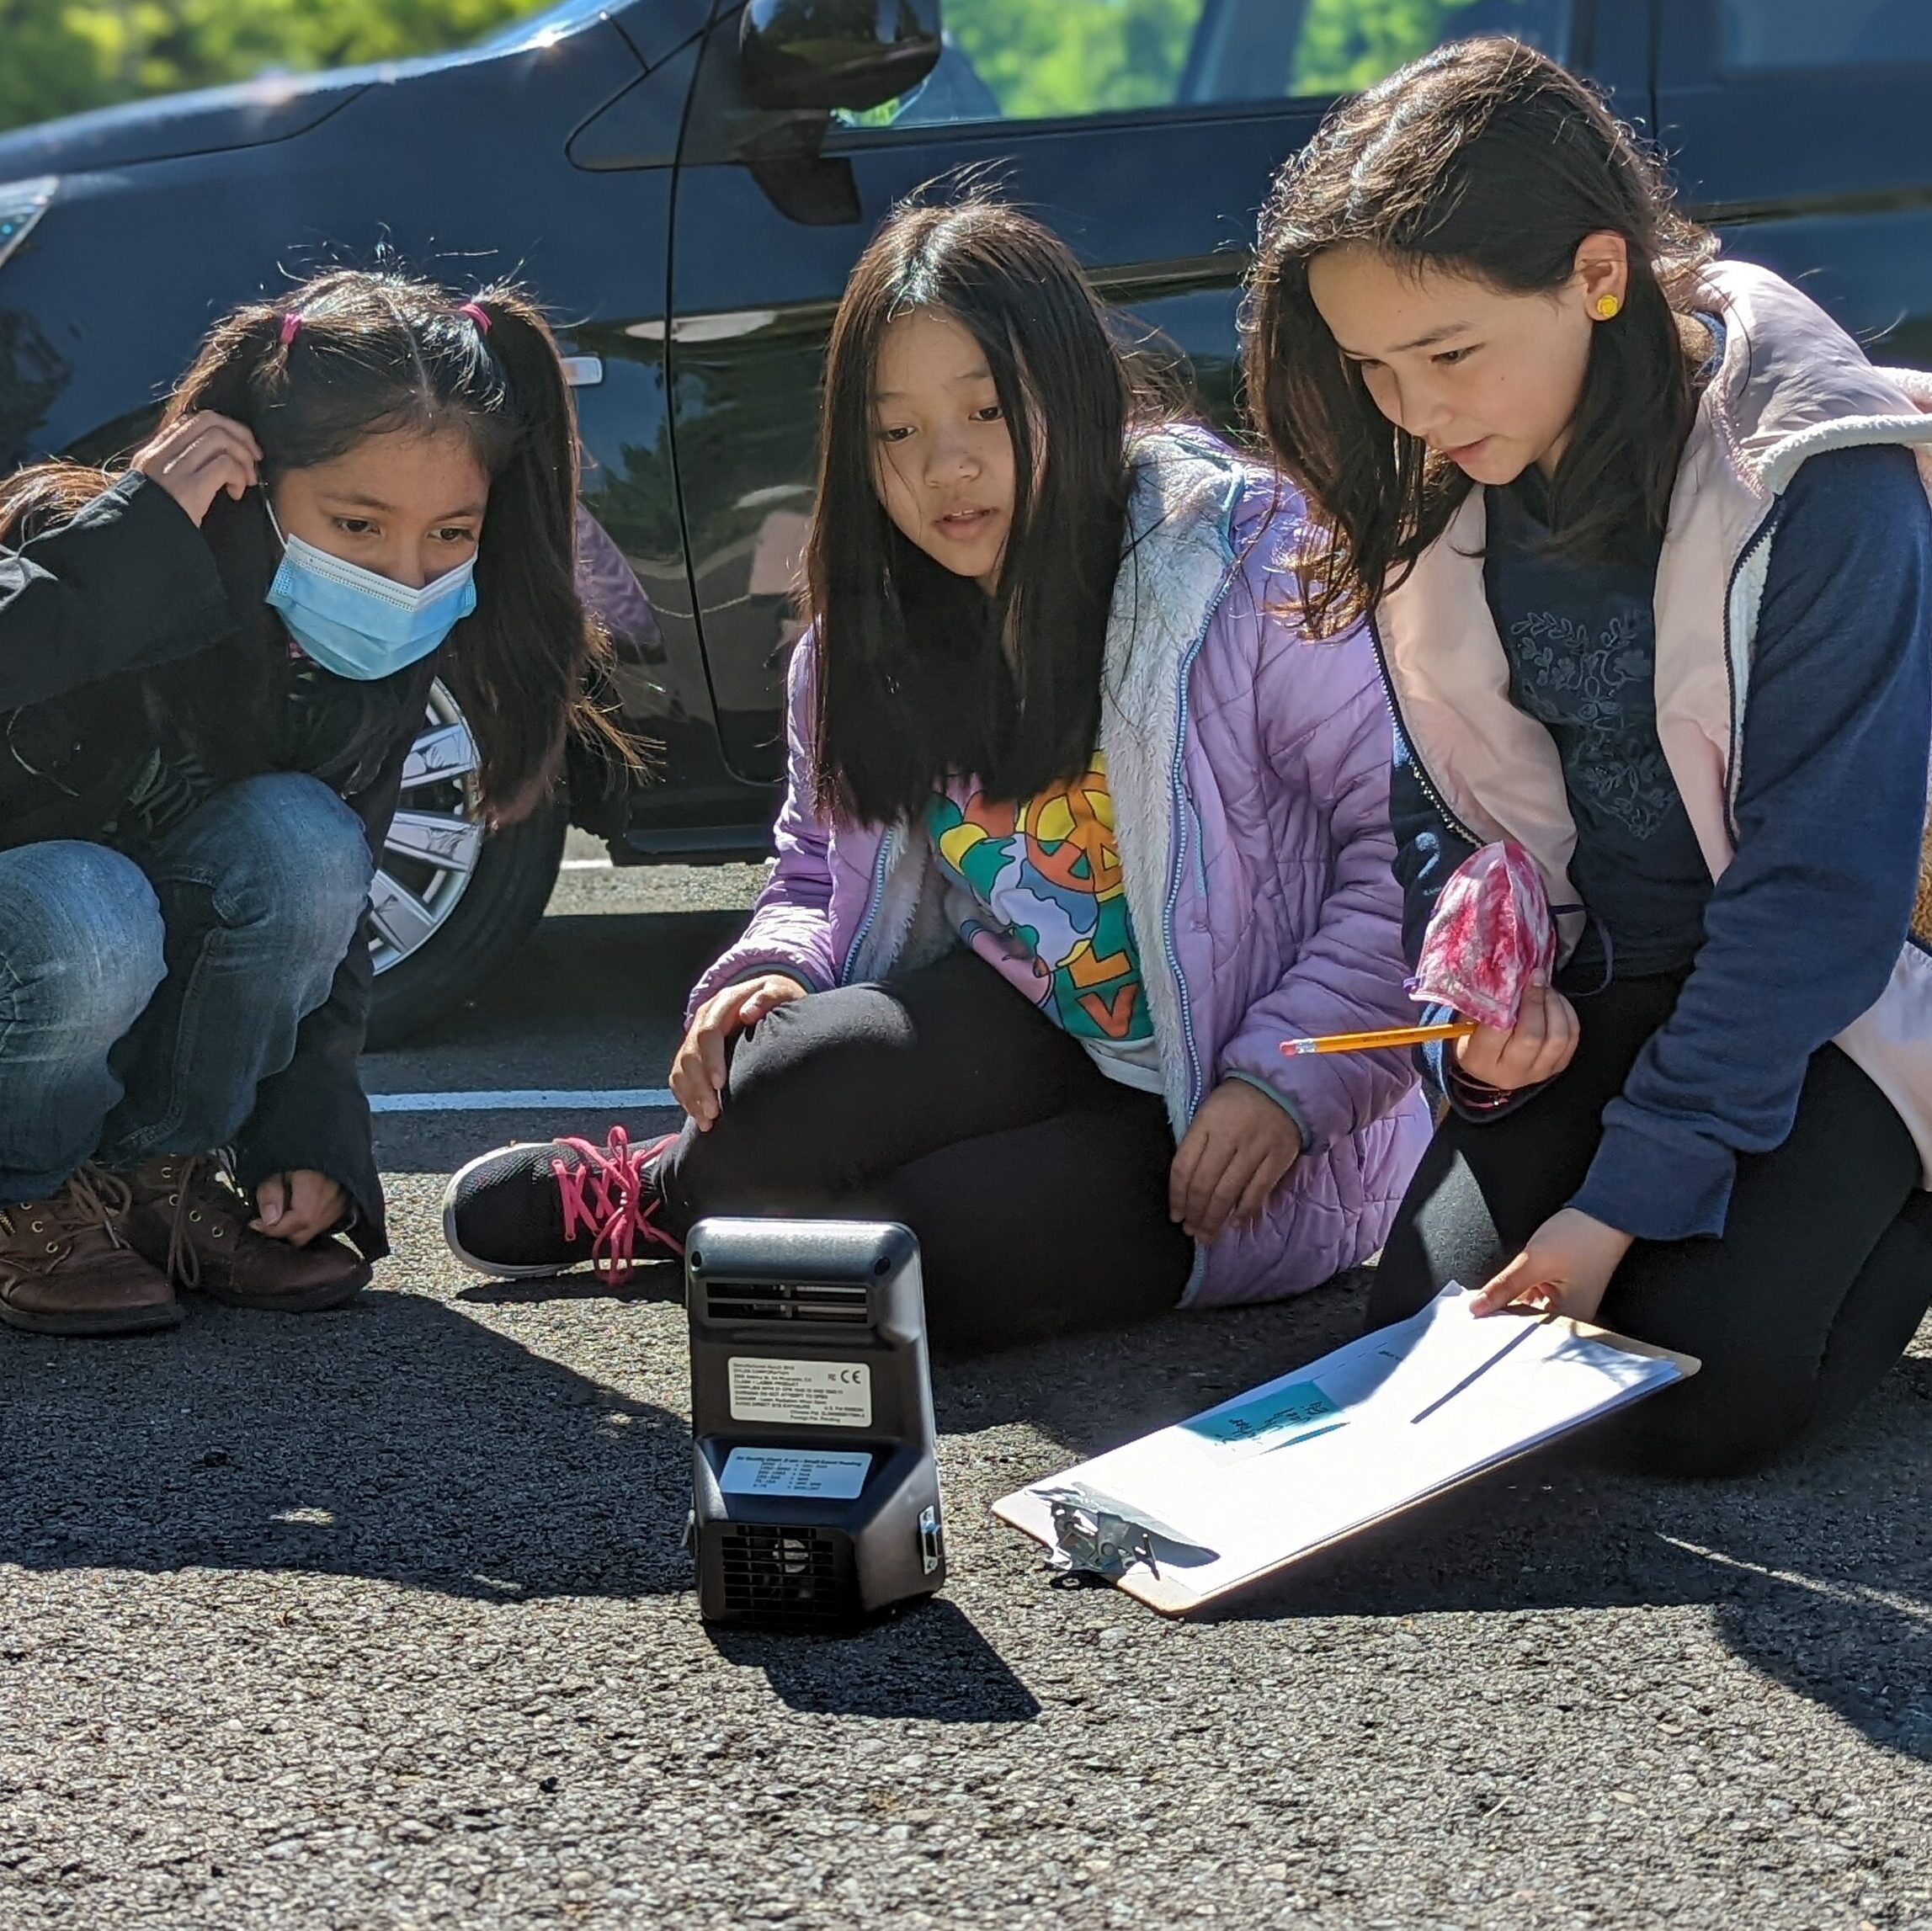 Tukwila School District students monitored the air quality on their campus as part of EarthGen's Breathing Easier program this summer.